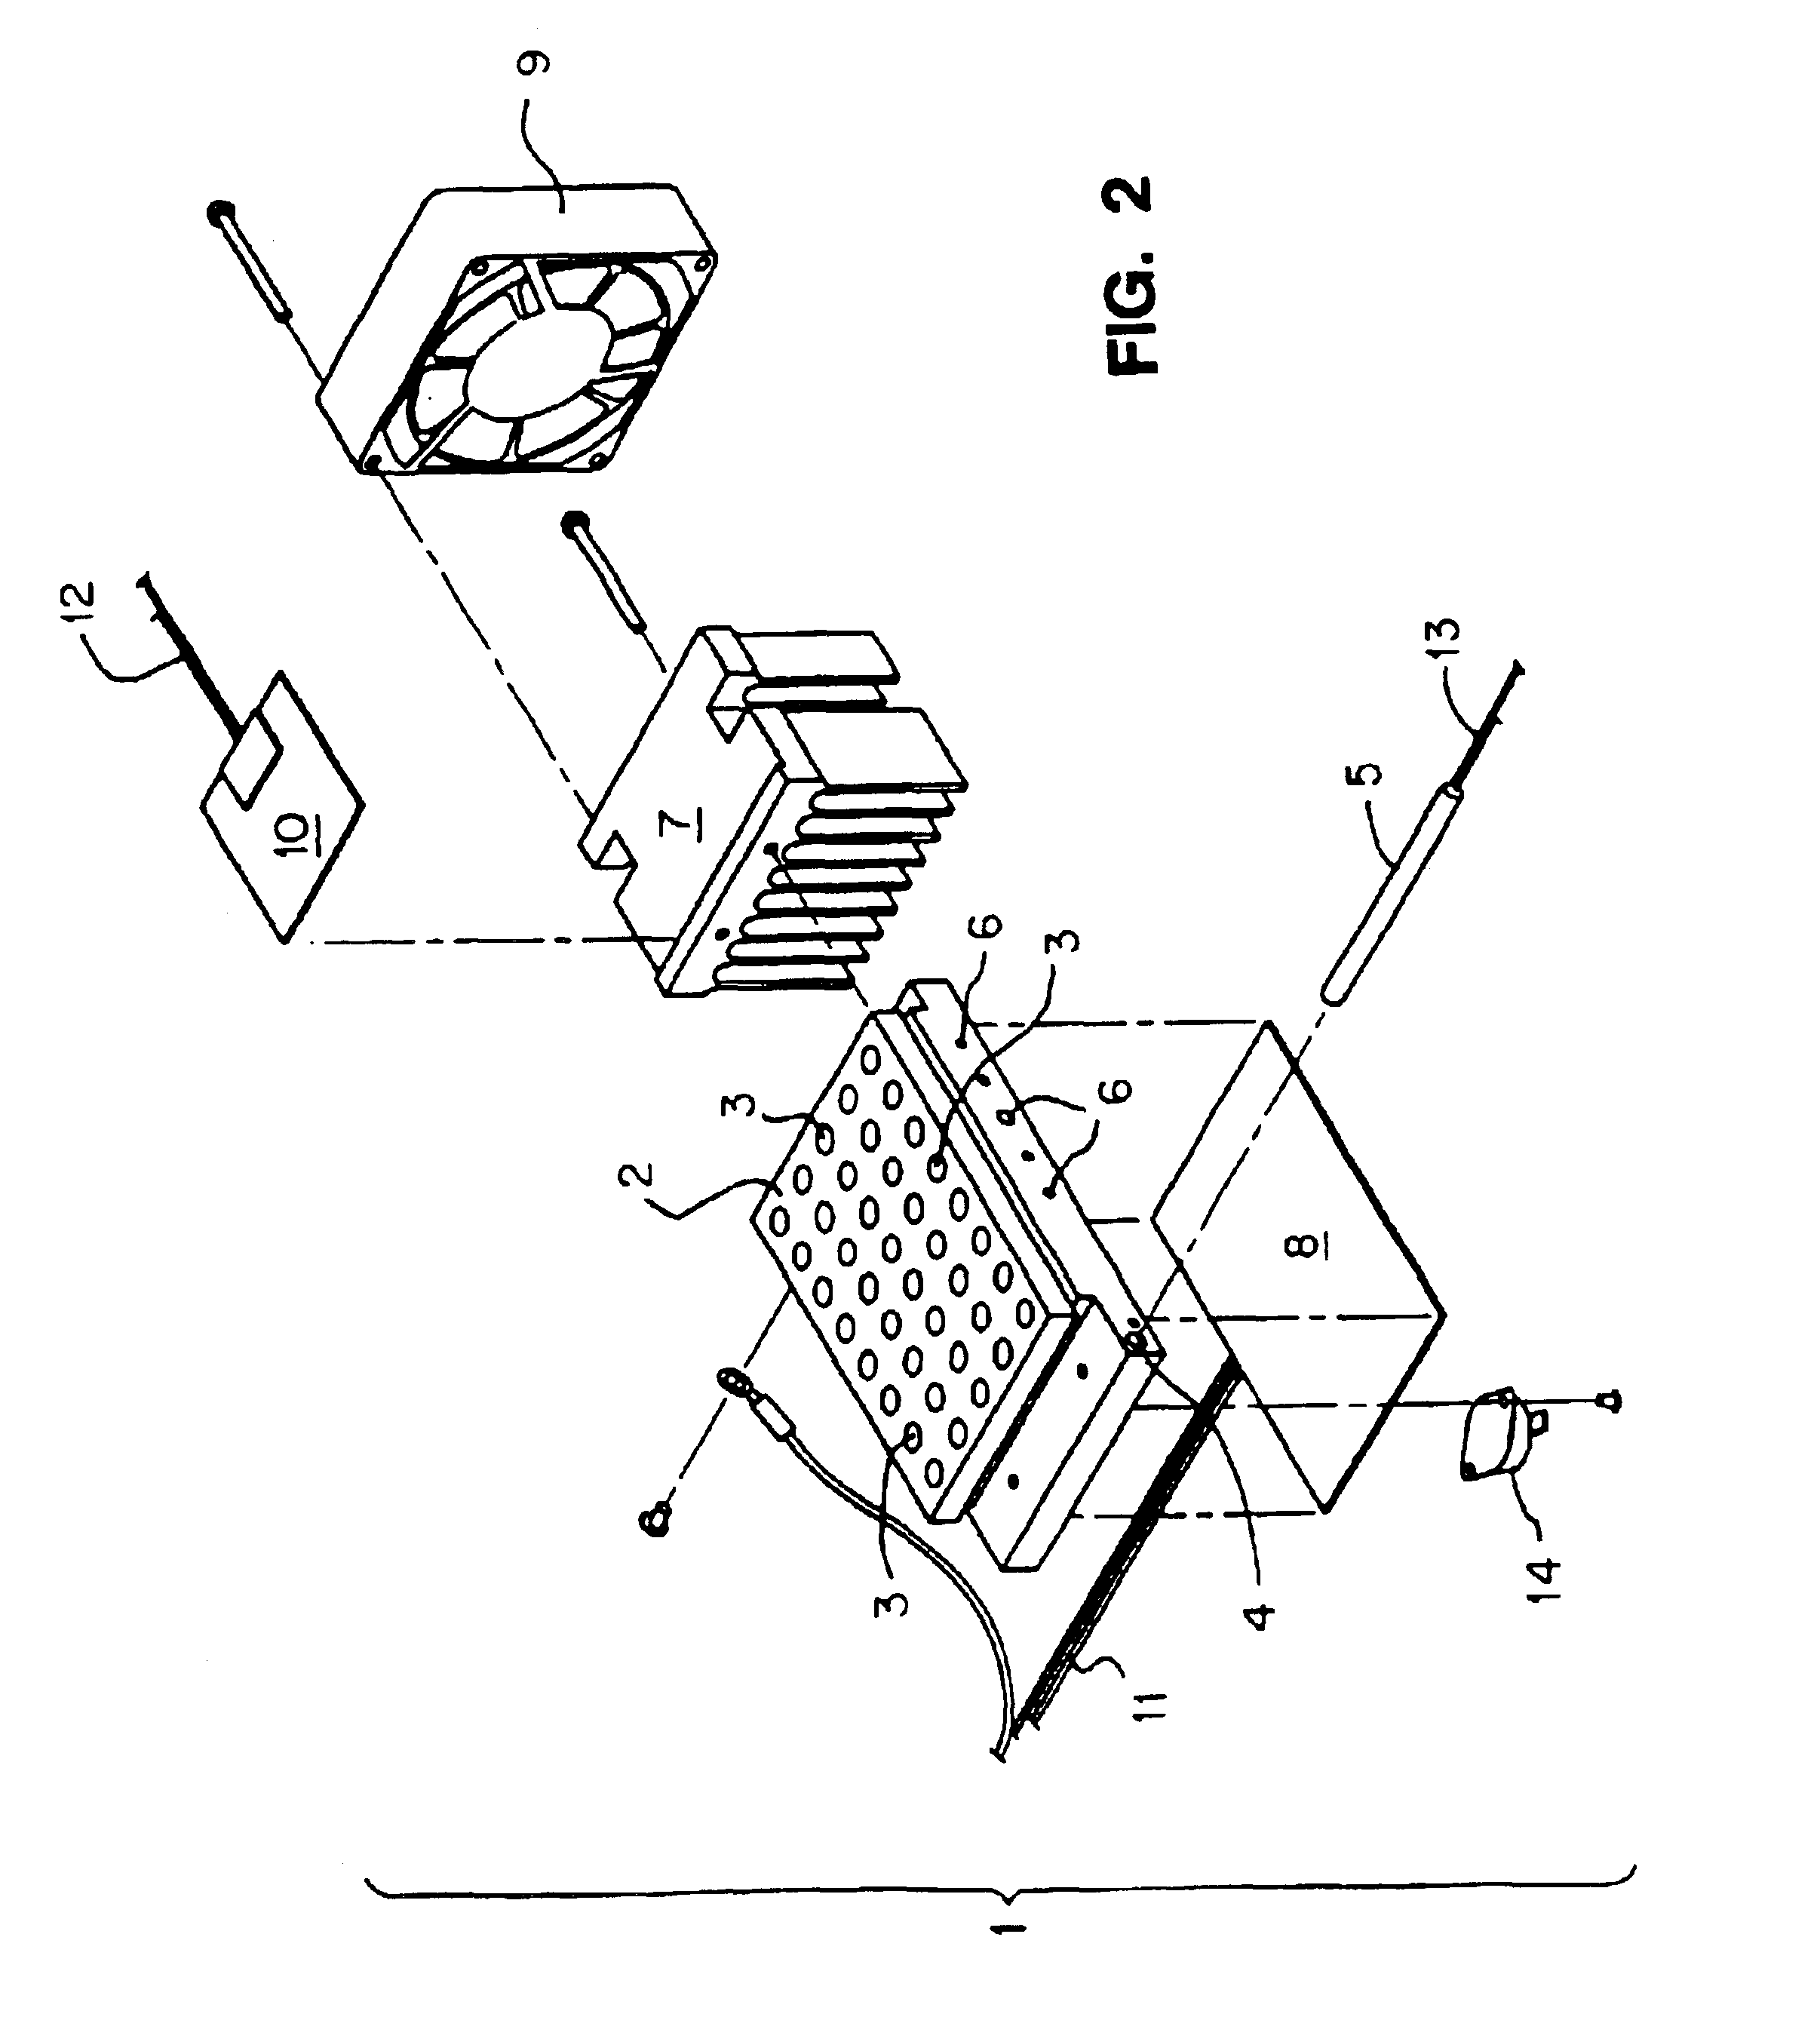 Thermal cycler including a temperature gradient block